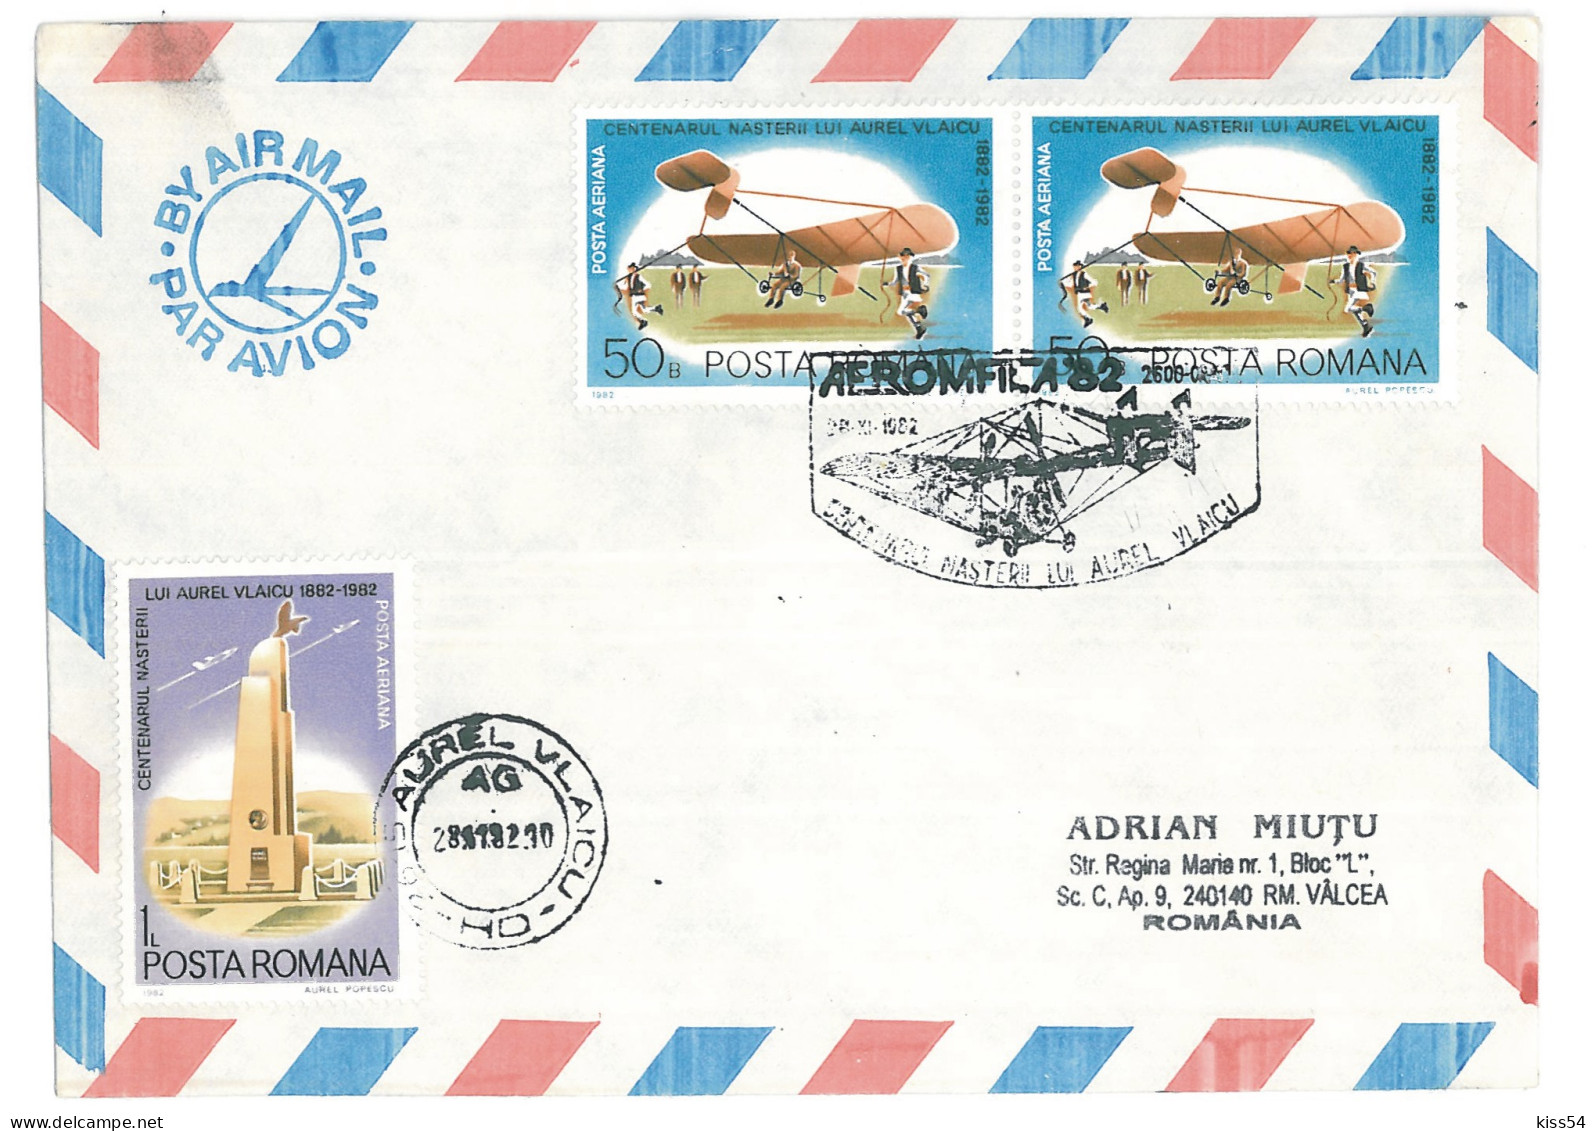 COV 30 - 221 AIRPLANE, Romania - Cover - Used - 1982 - Covers & Documents